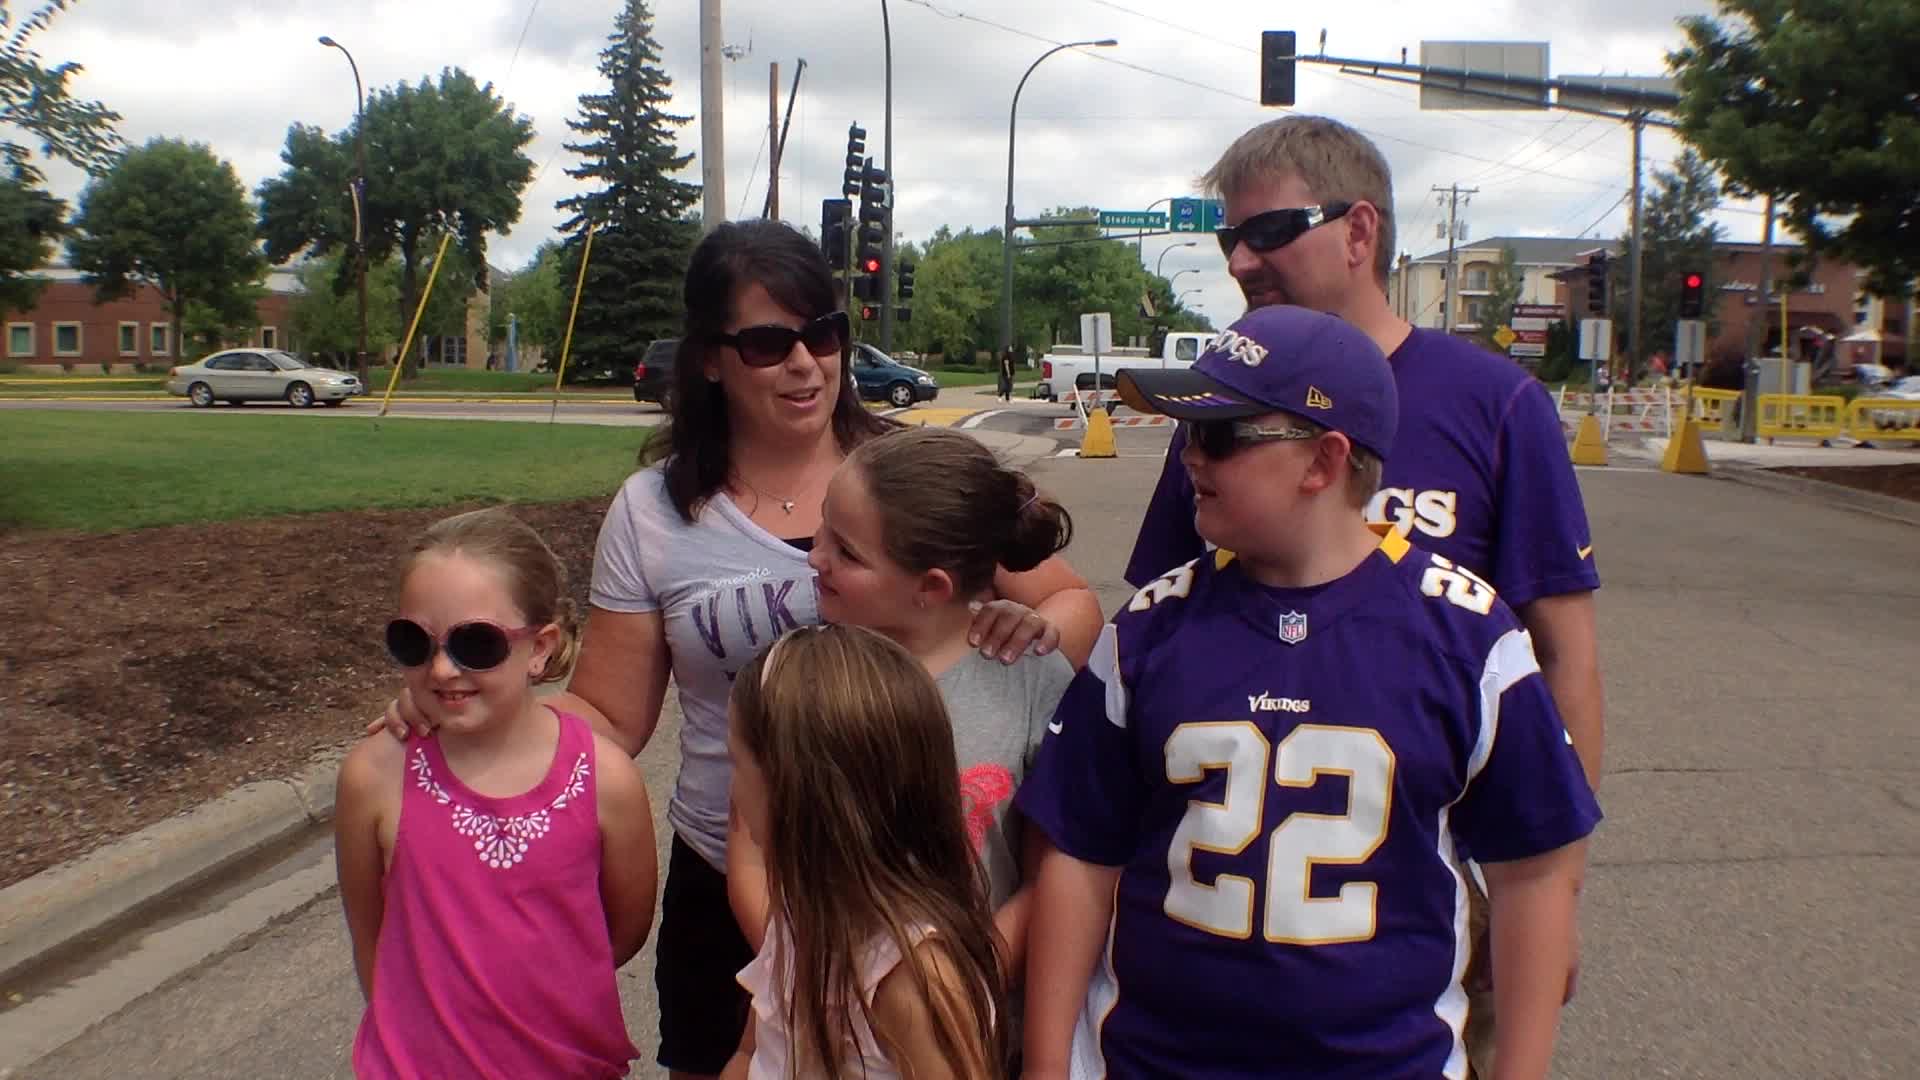 Al VanCoulter, Lora VanCoulter and their children, Reedsburg, WI - Fan experiences at Minnesota Vikings Training Camp